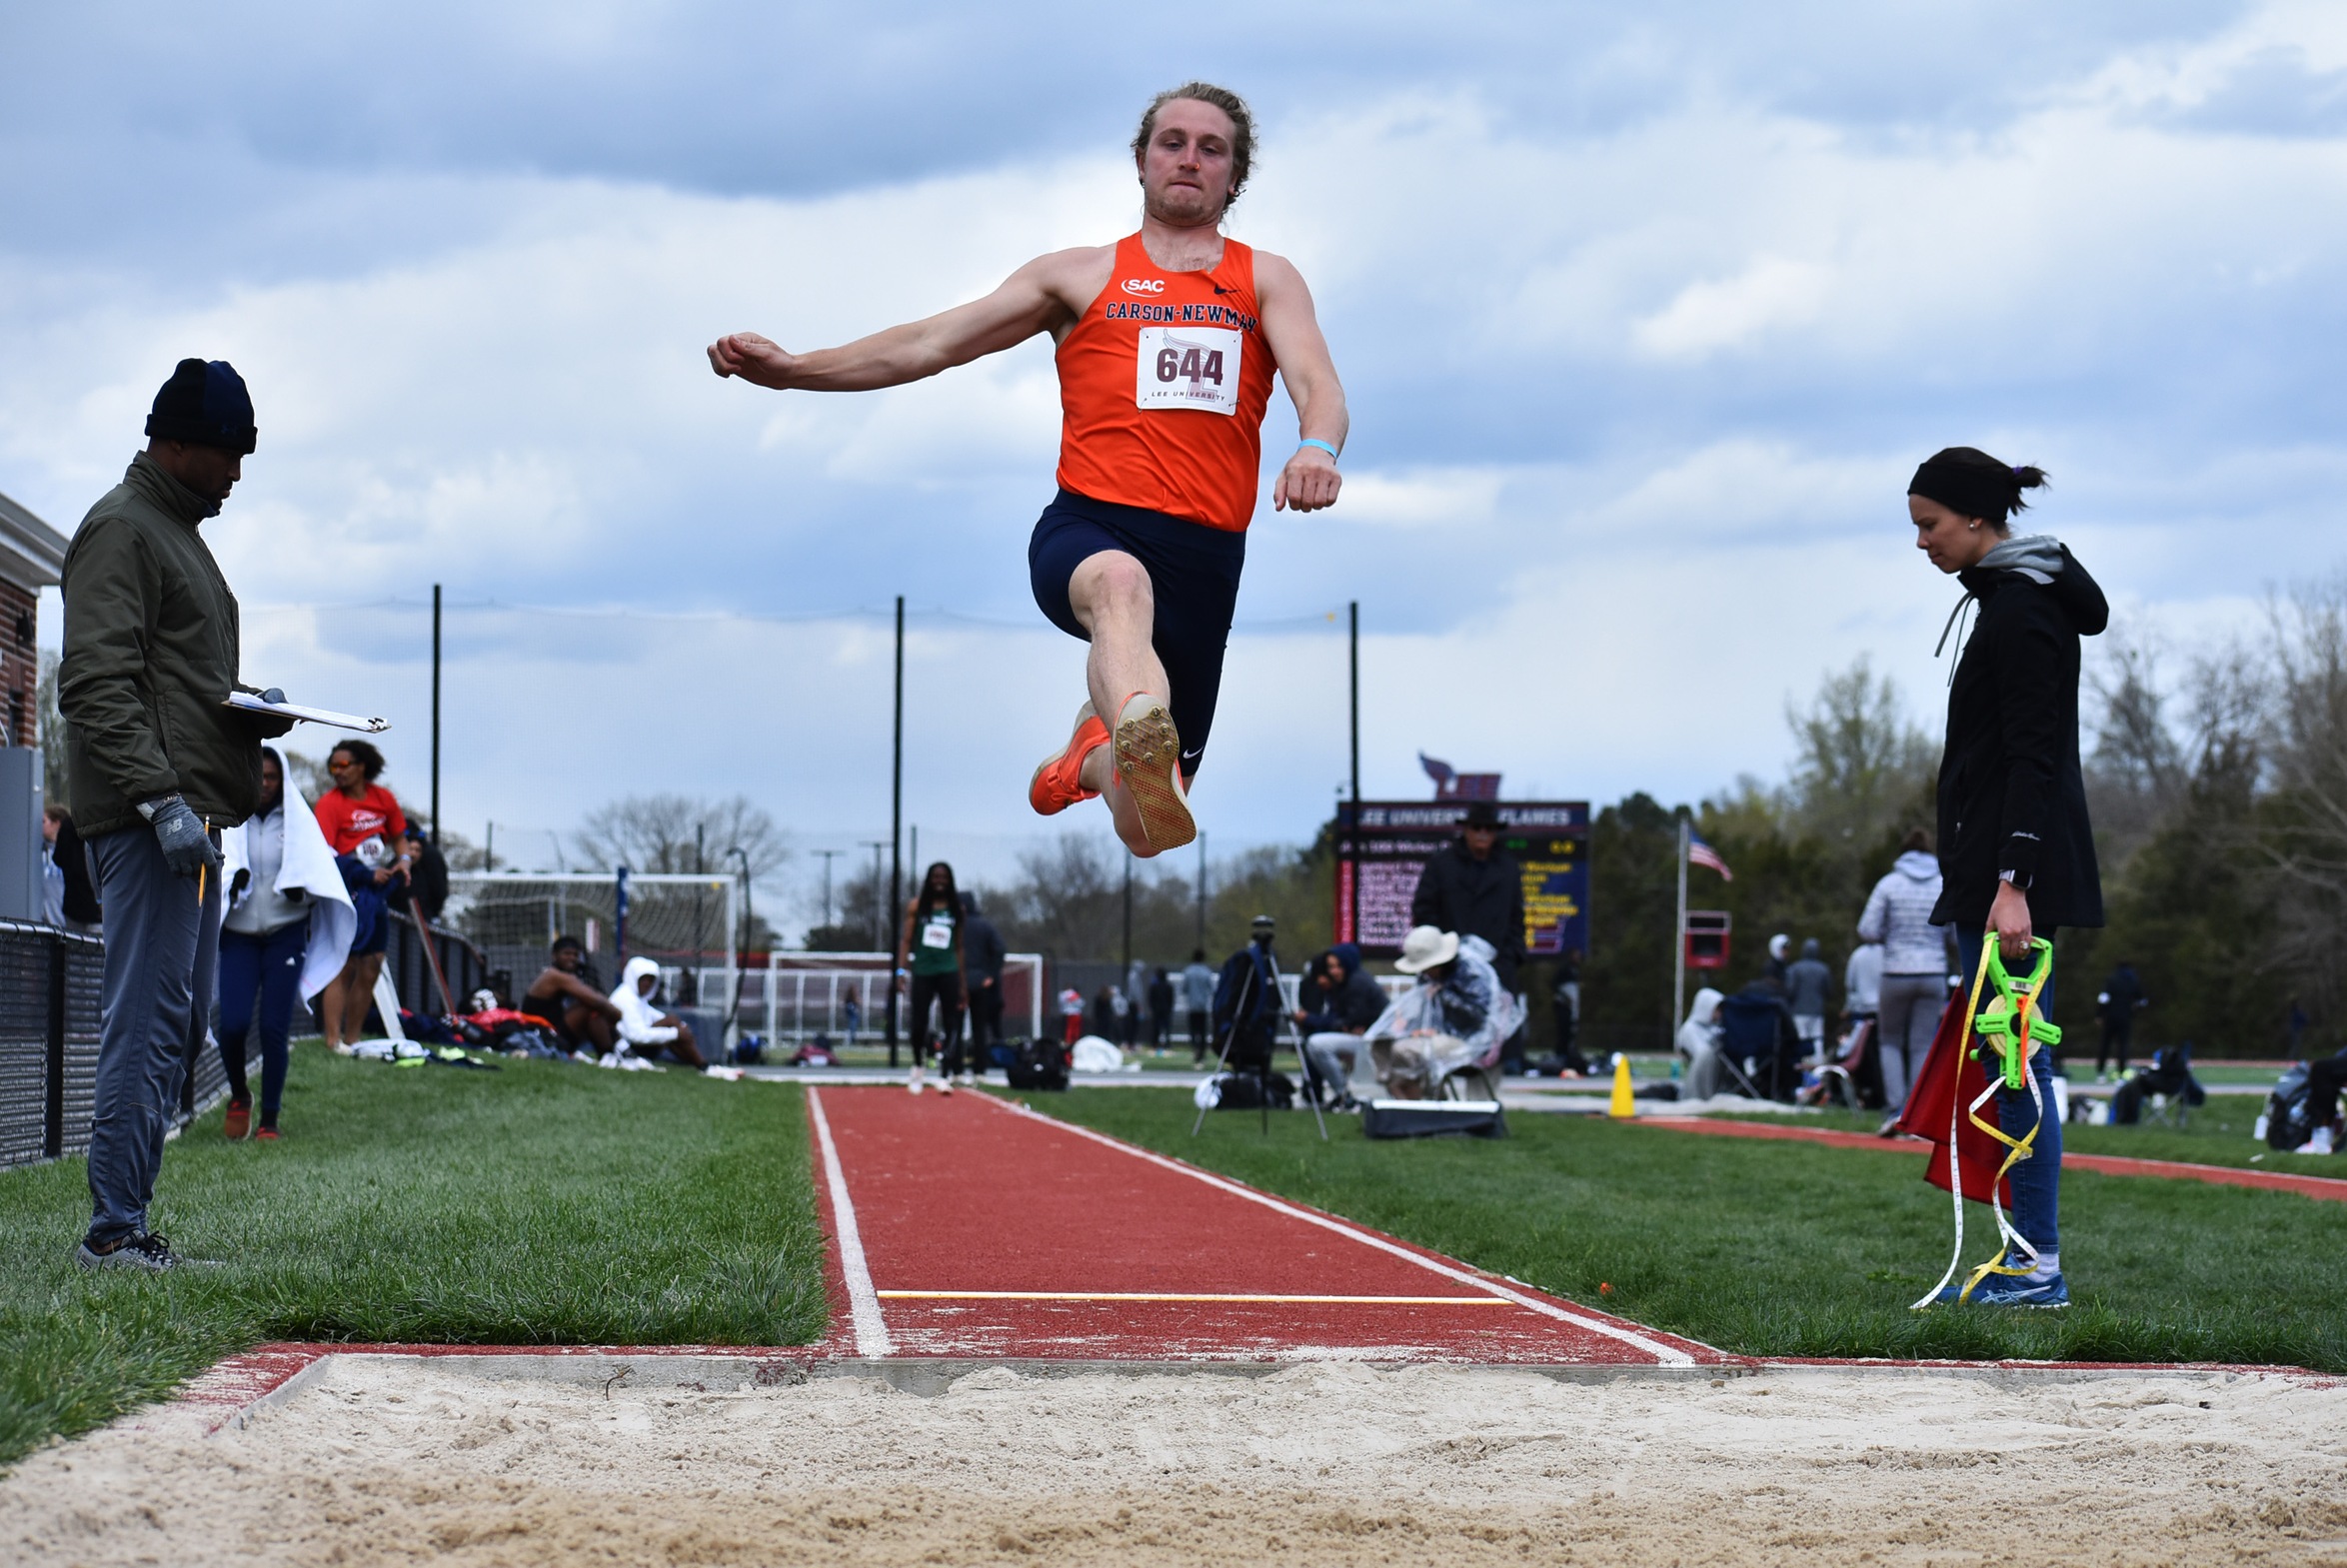 Convocation eyes championship gold at the 2022 SAC Outdoor Championships